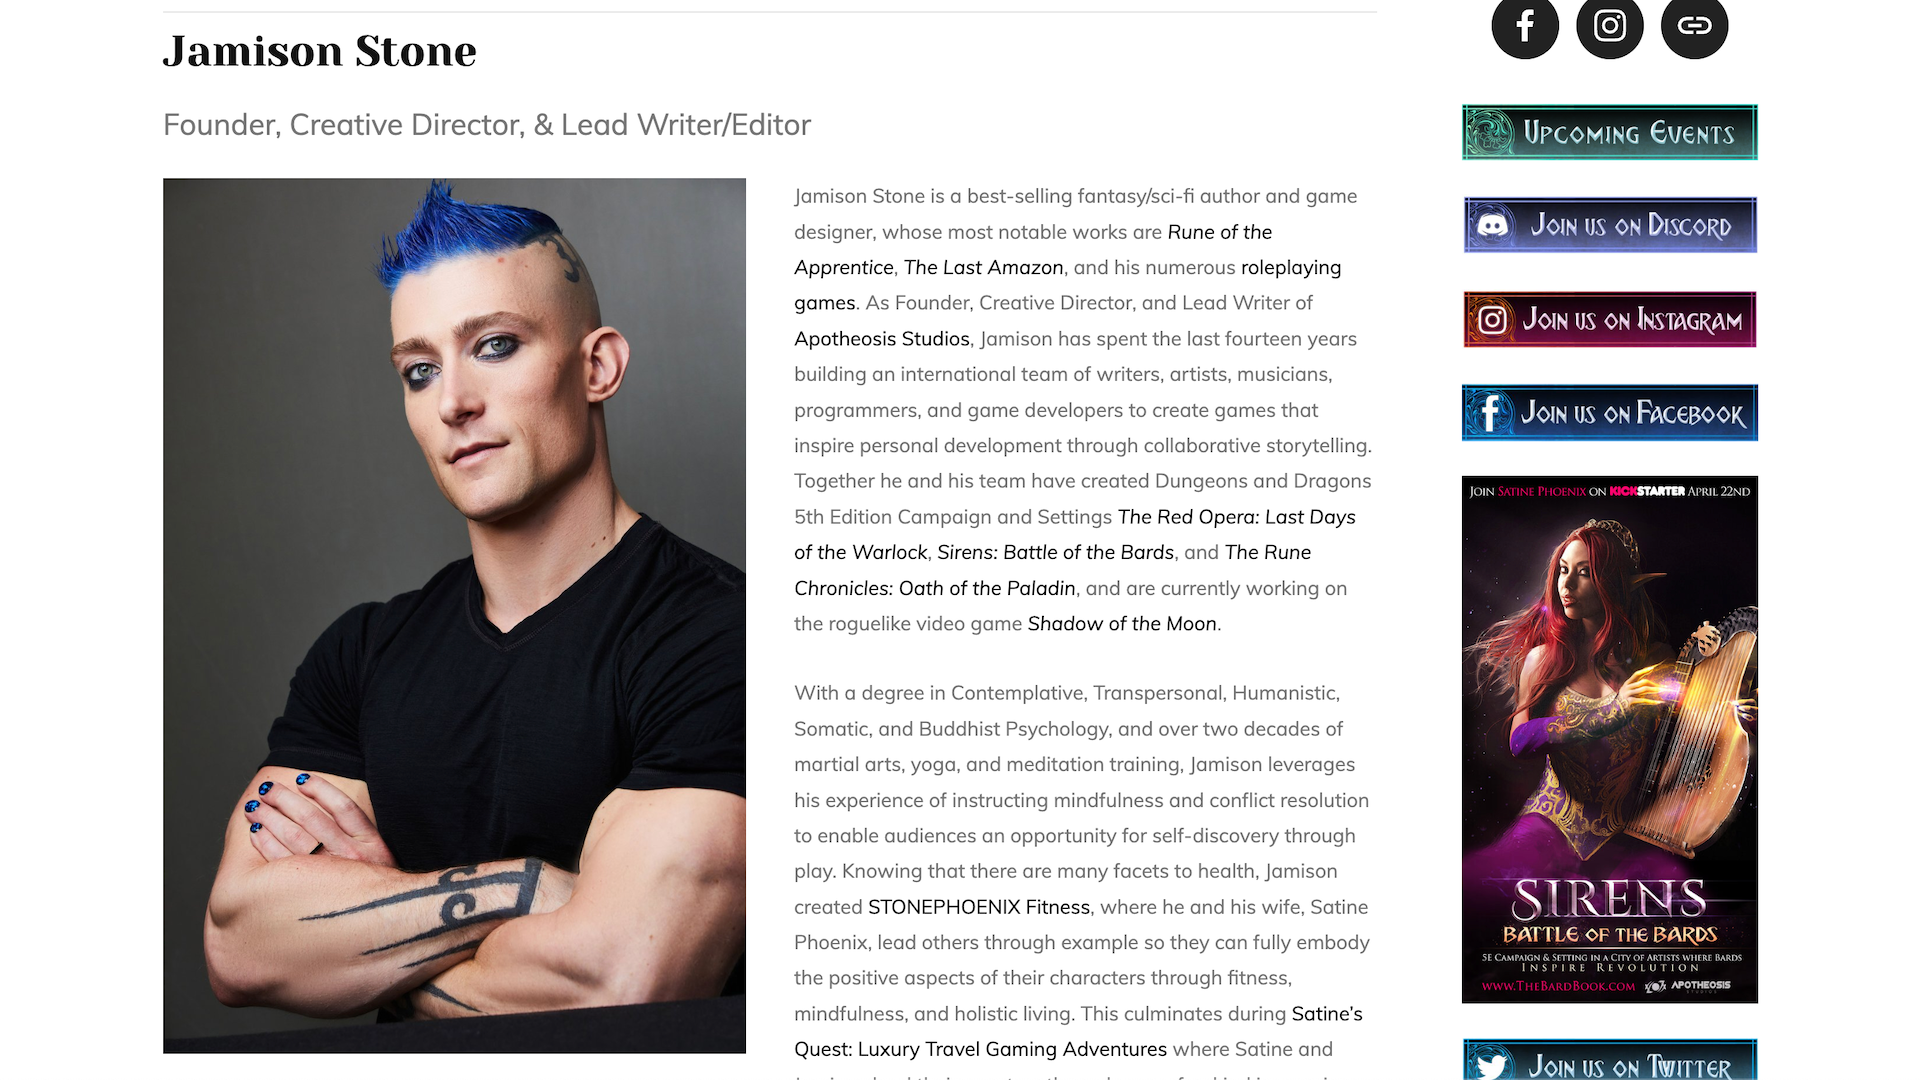 A screenshot of Apotheosis Studio's website taken on June 29th and showing Jamison Stone added back to the Team Bios page.